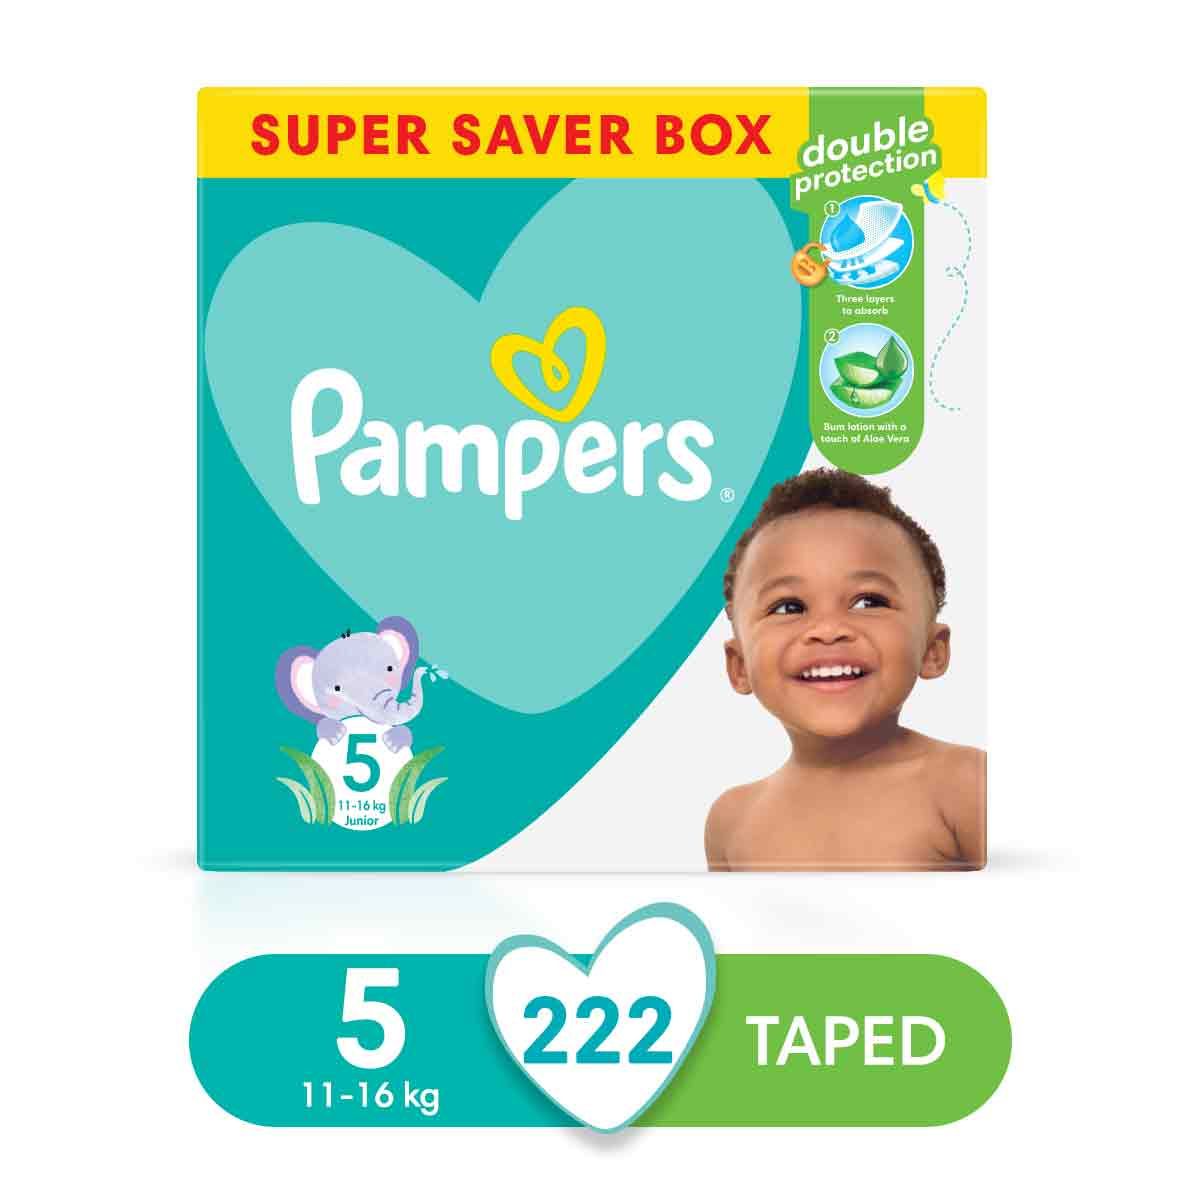 pampers super dry